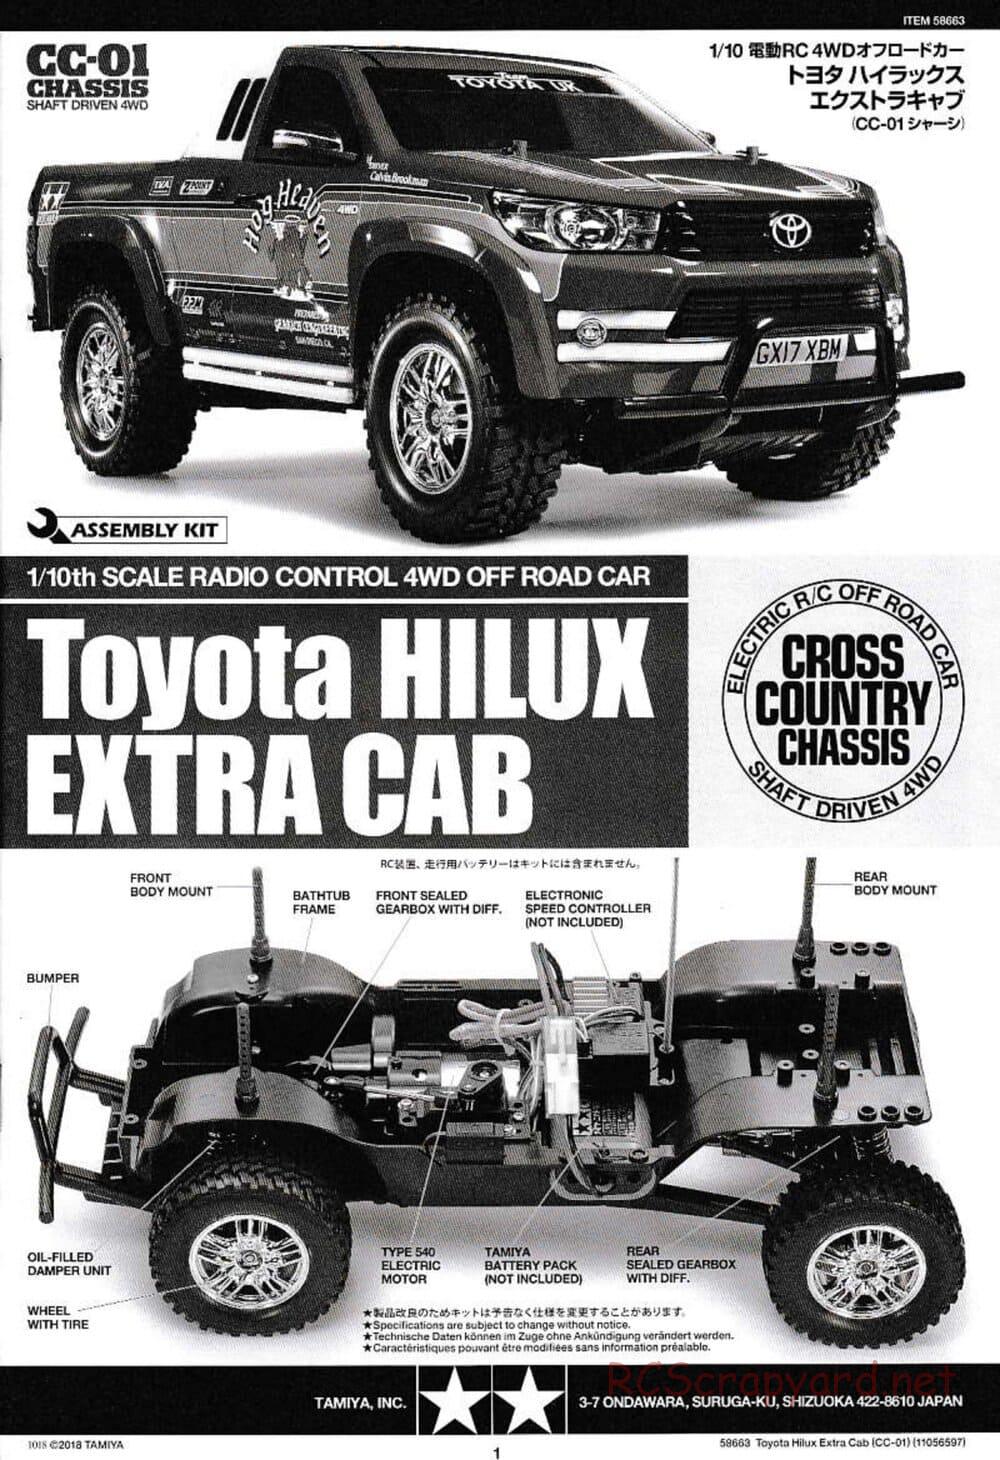 Tamiya - Toyota Hilux Extra Cab - CC-01 Chassis - Manual - Page 1